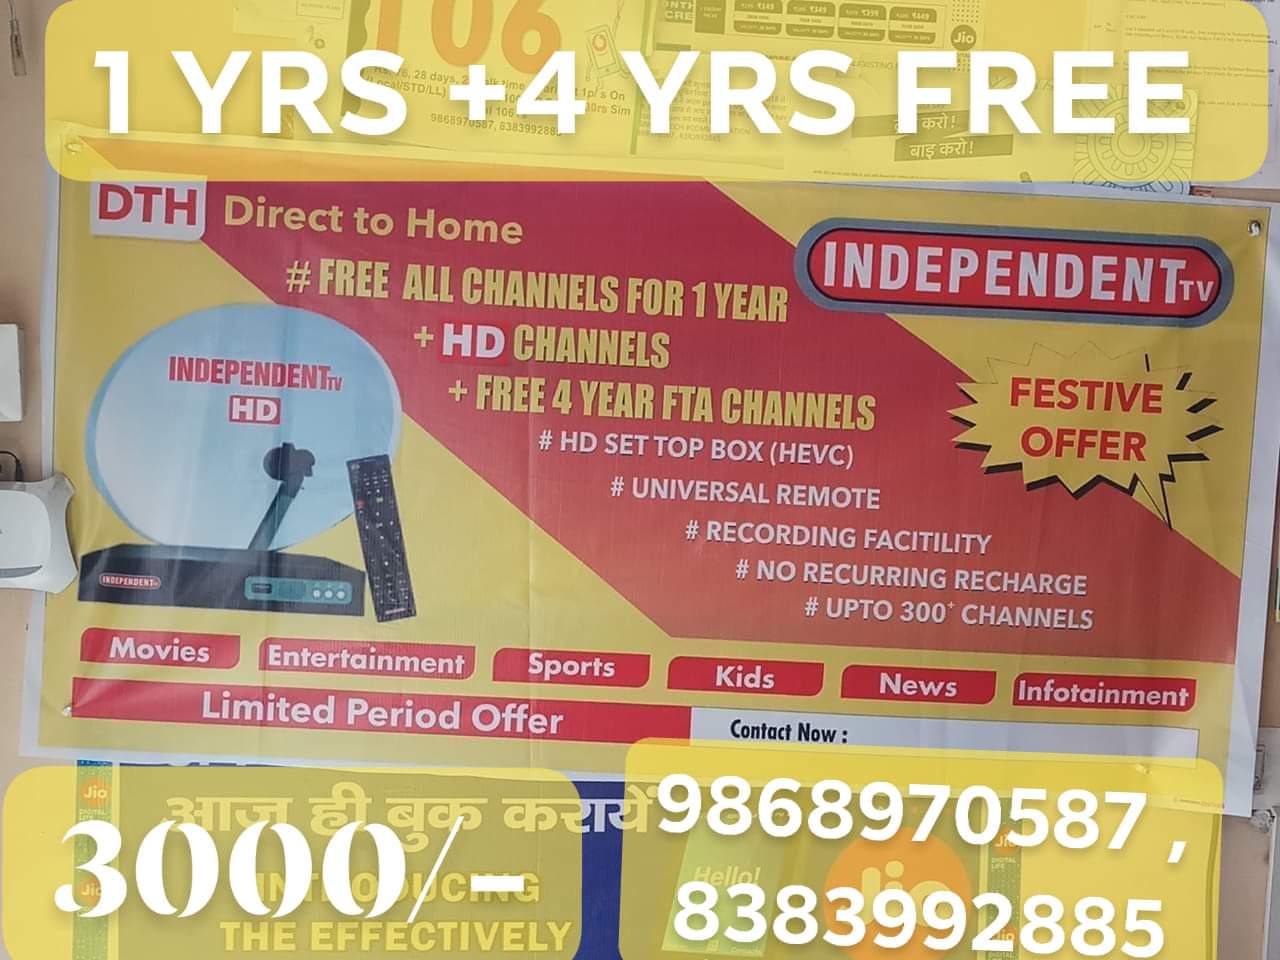 INDEPENDENT TV DTH SERVICE HD SET OF BOX 1YRS + 4 YRS FREE FREE FREEElectronics and AppliancesTelevisionsWest Delhi